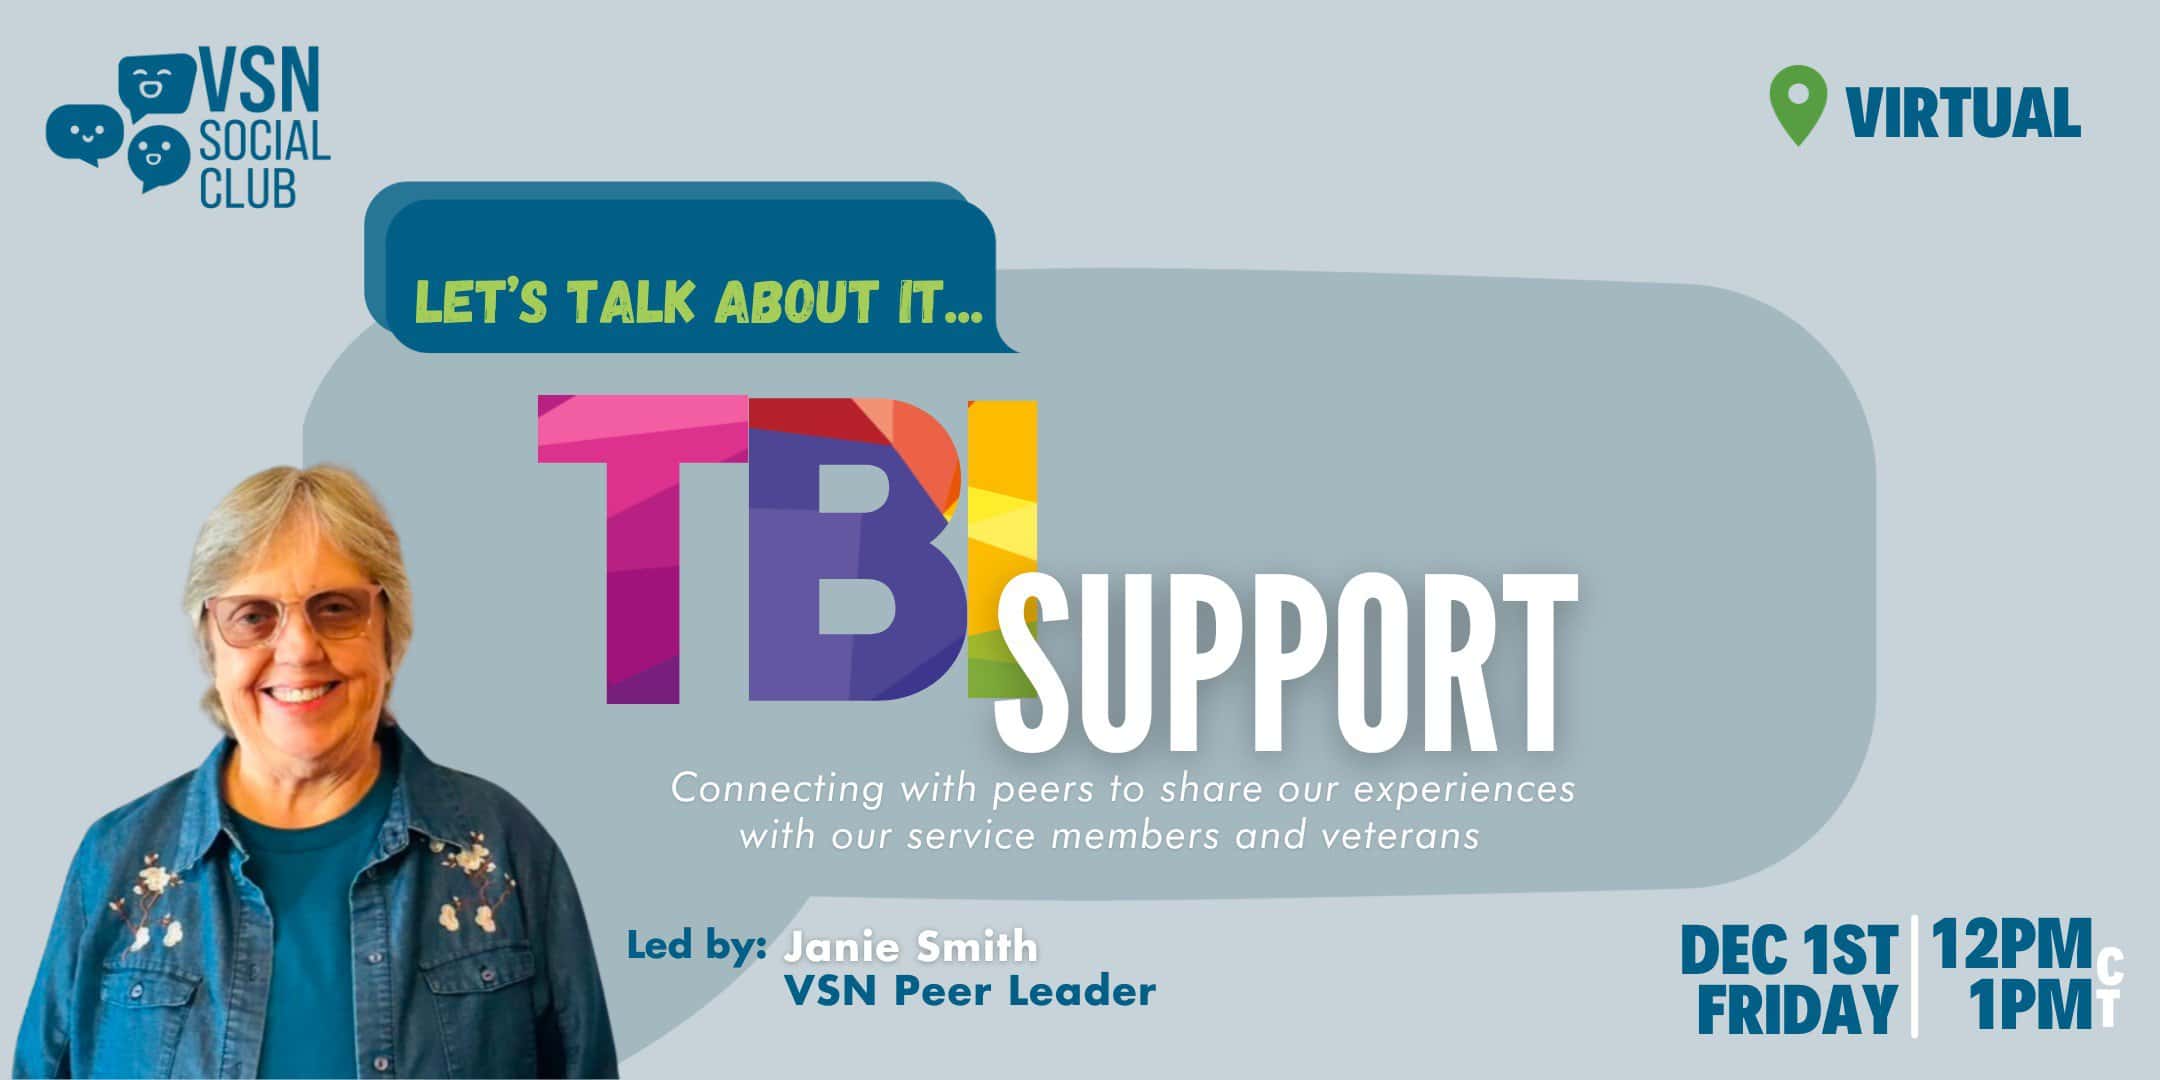 Let's talk about it: TBI Support